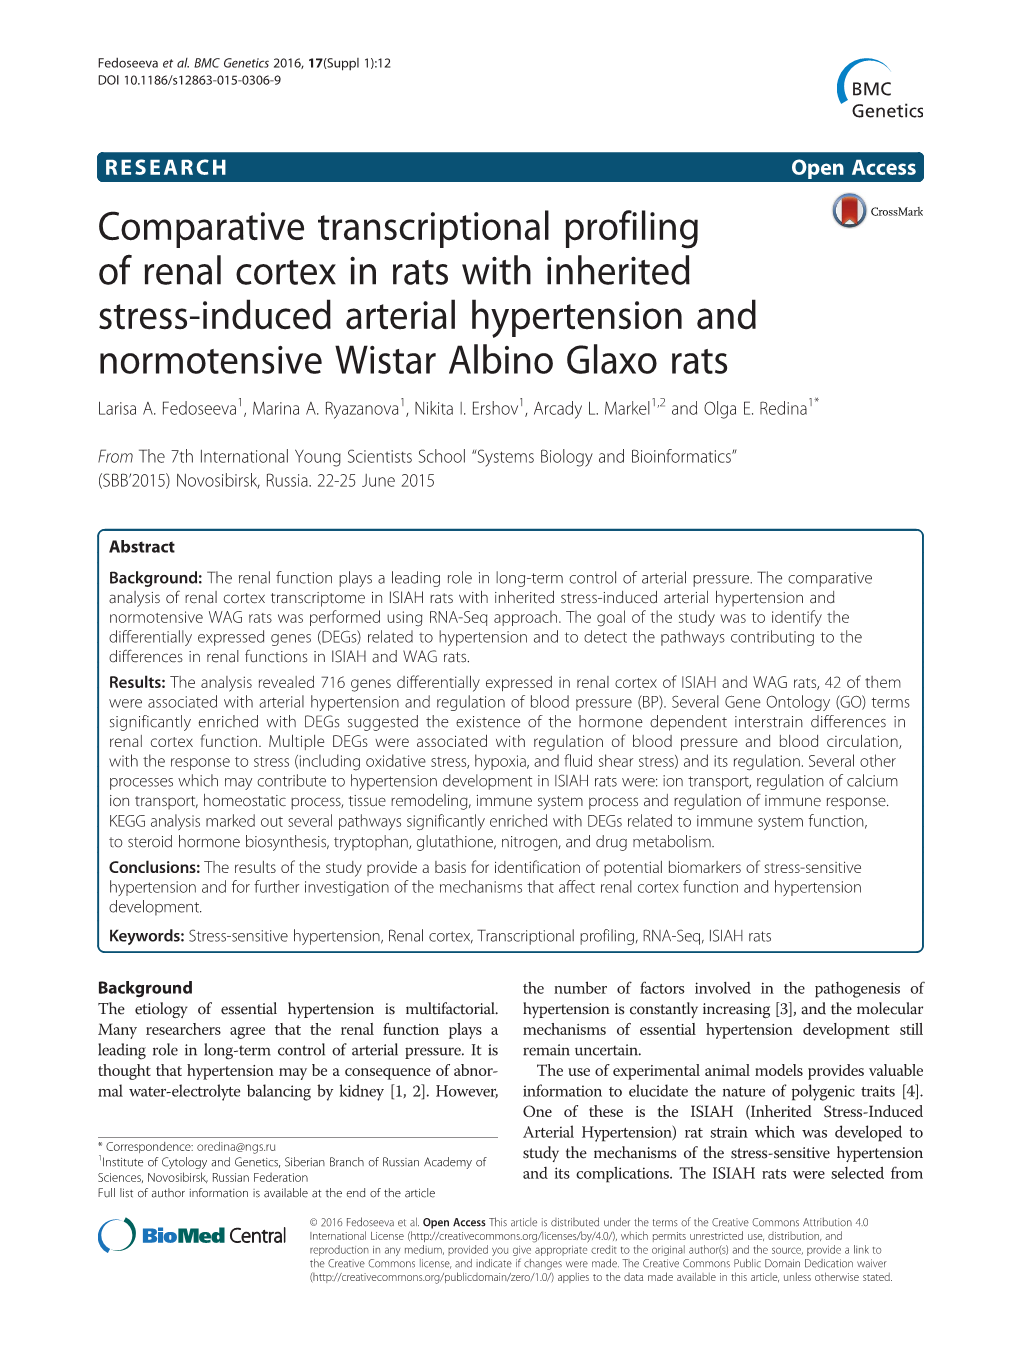 Comparative Transcriptional Profiling of Renal Cortex in Rats with Inherited Stress-Induced Arterial Hypertension and Normotensive Wistar Albino Glaxo Rats Larisa A